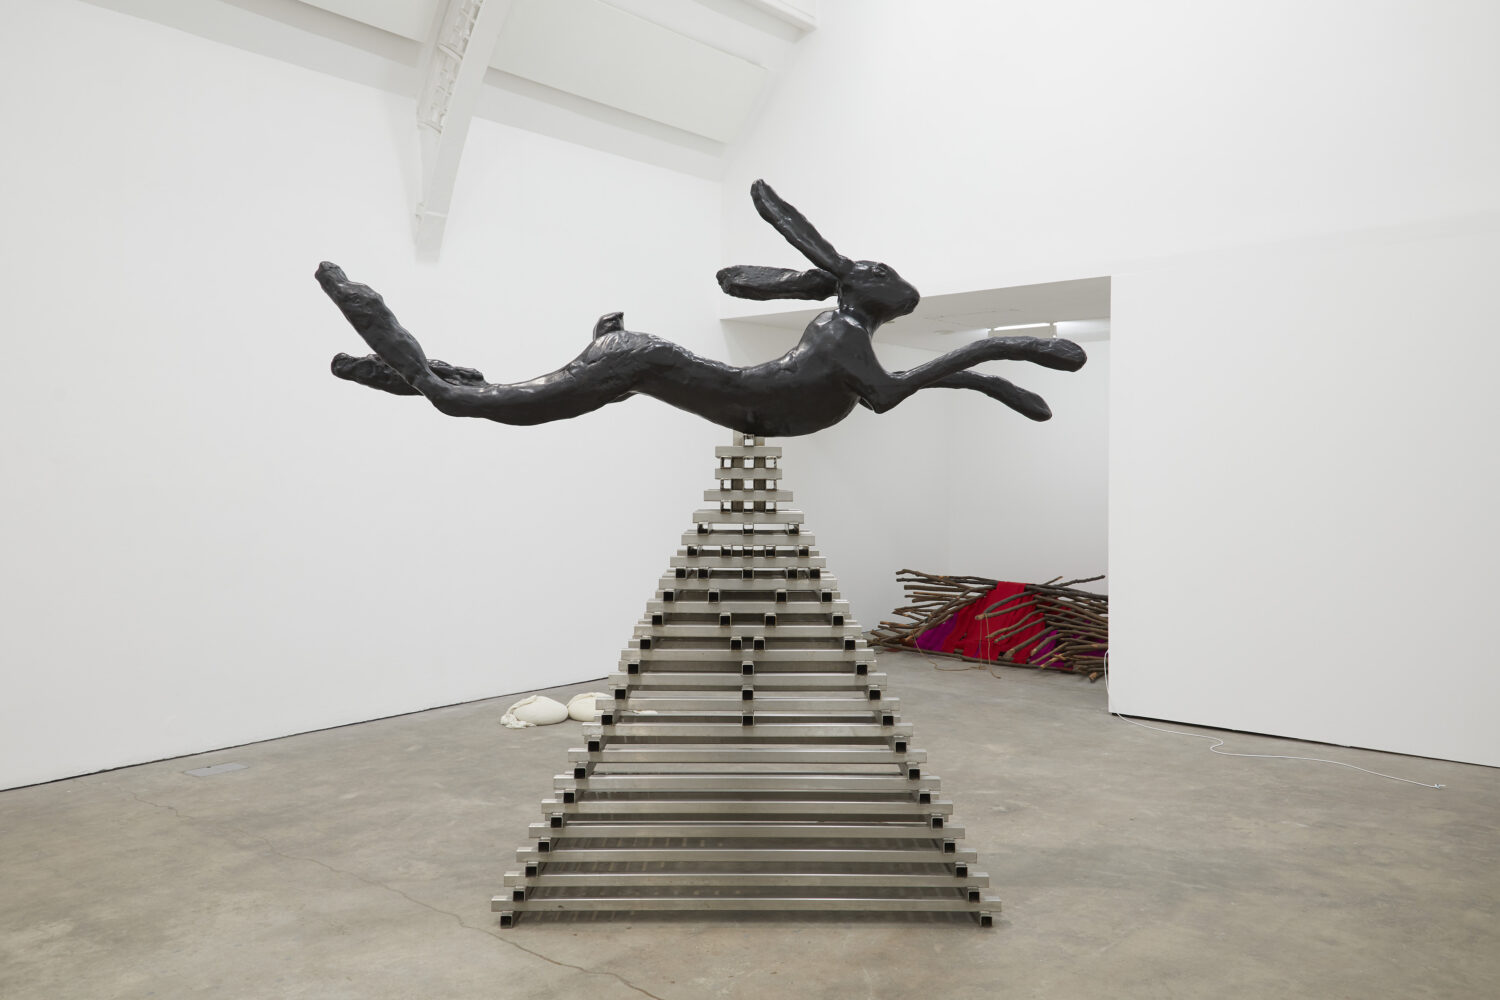 Large Leaping Hare (1982) in Barry Flanagan at Ikon Gallery, Birmingham, 2019